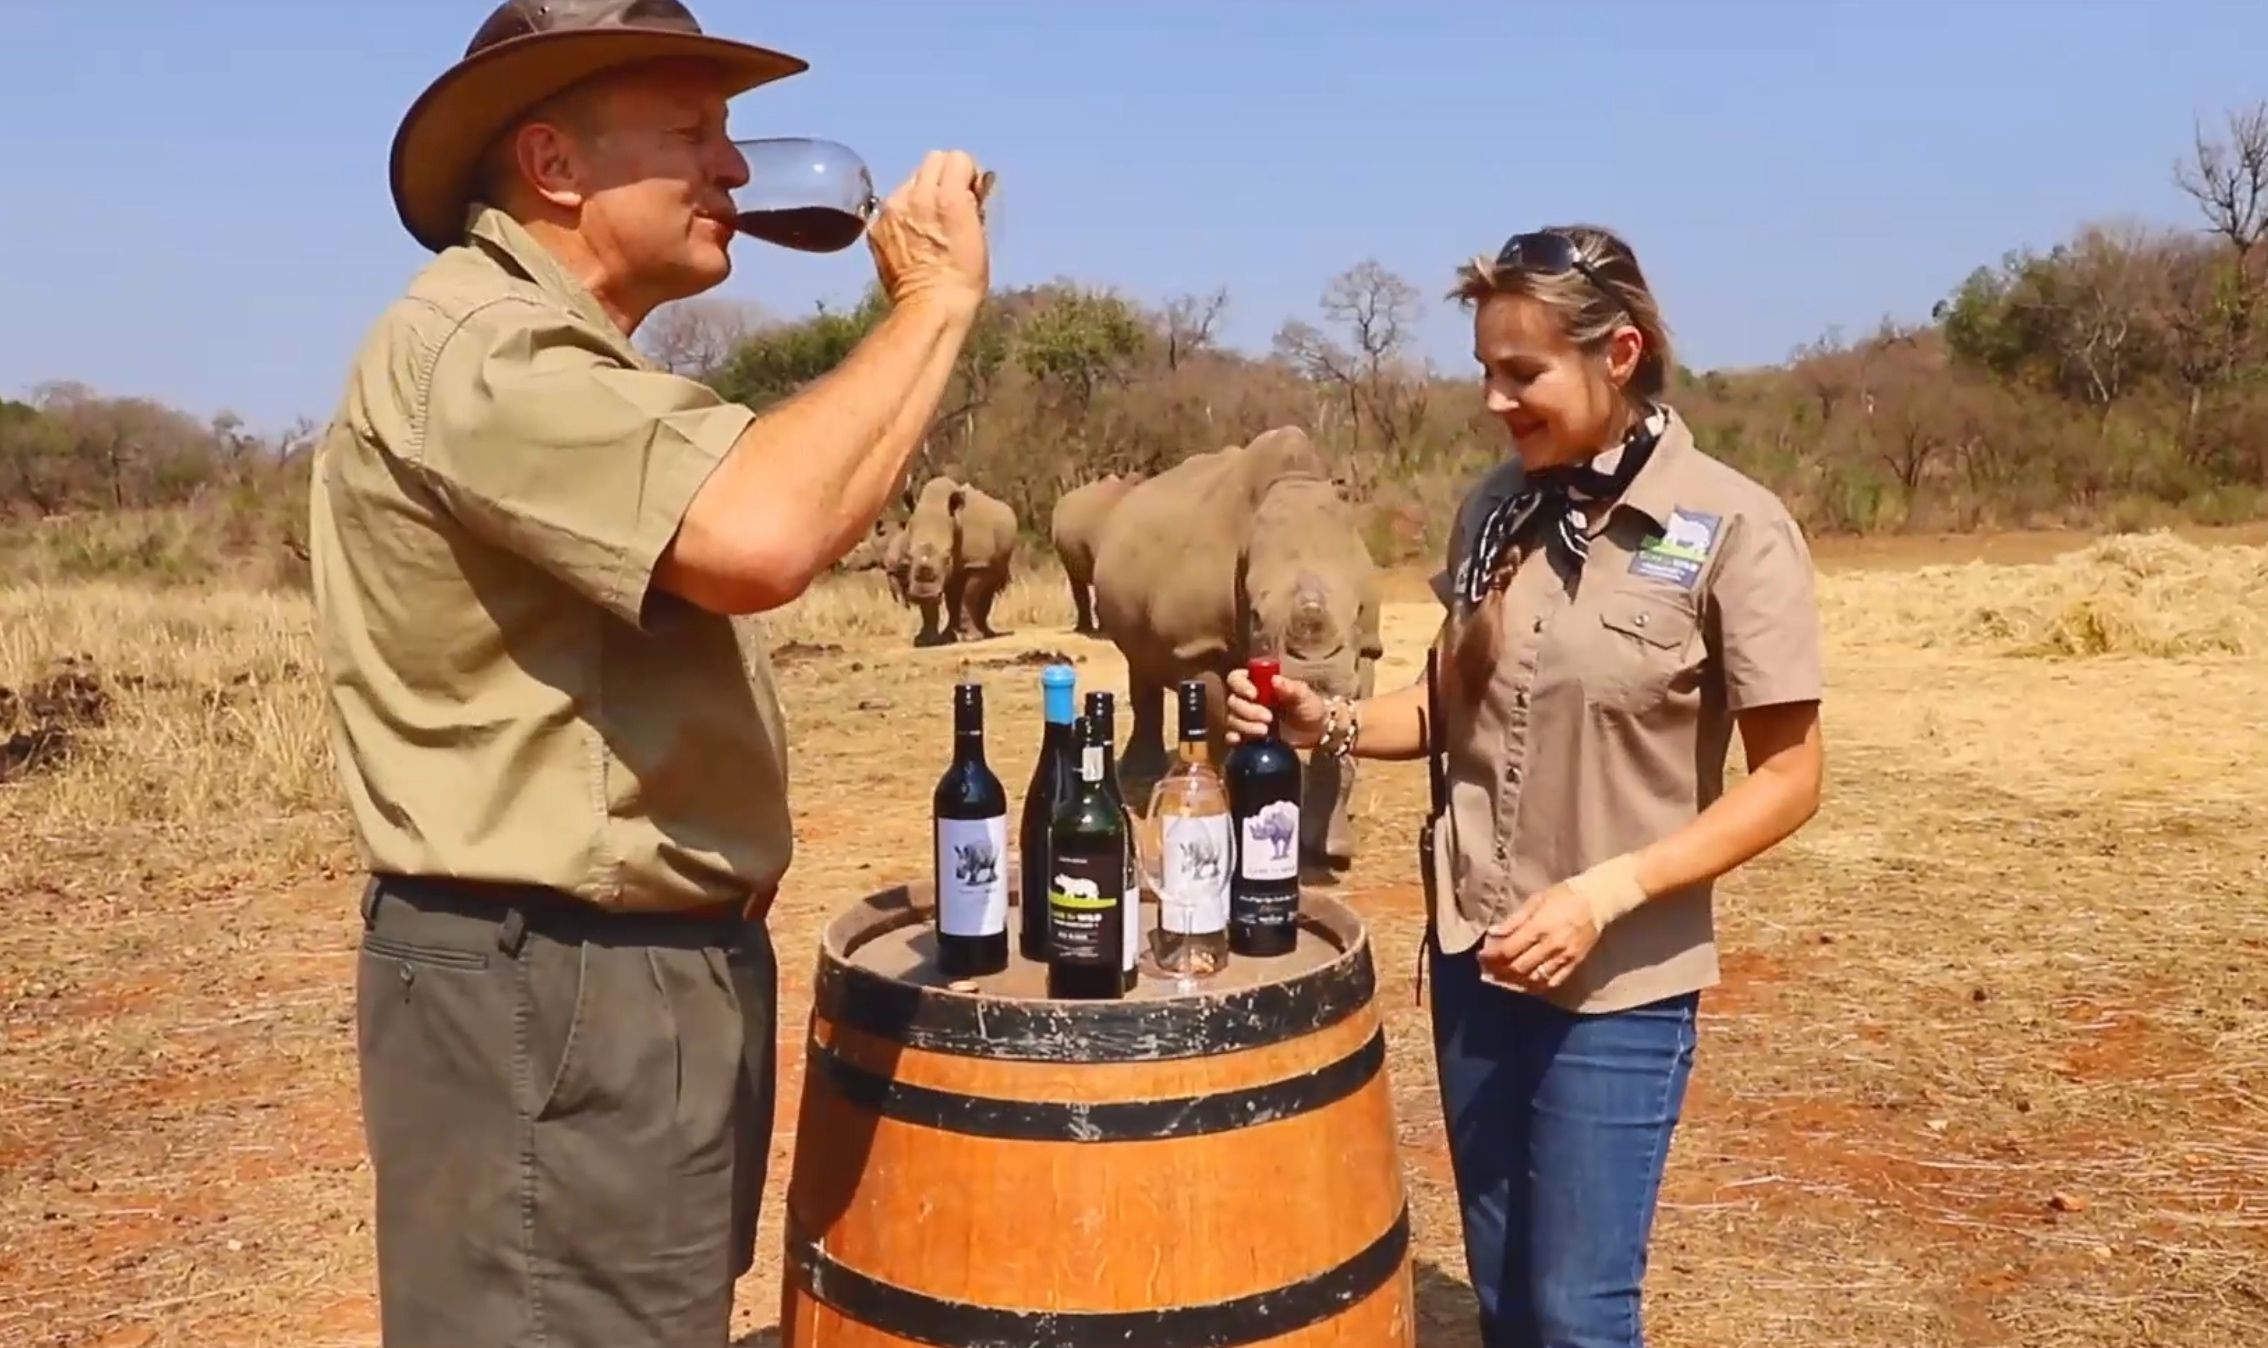 Care for Wild wines hopes to help rhinos & South African wine